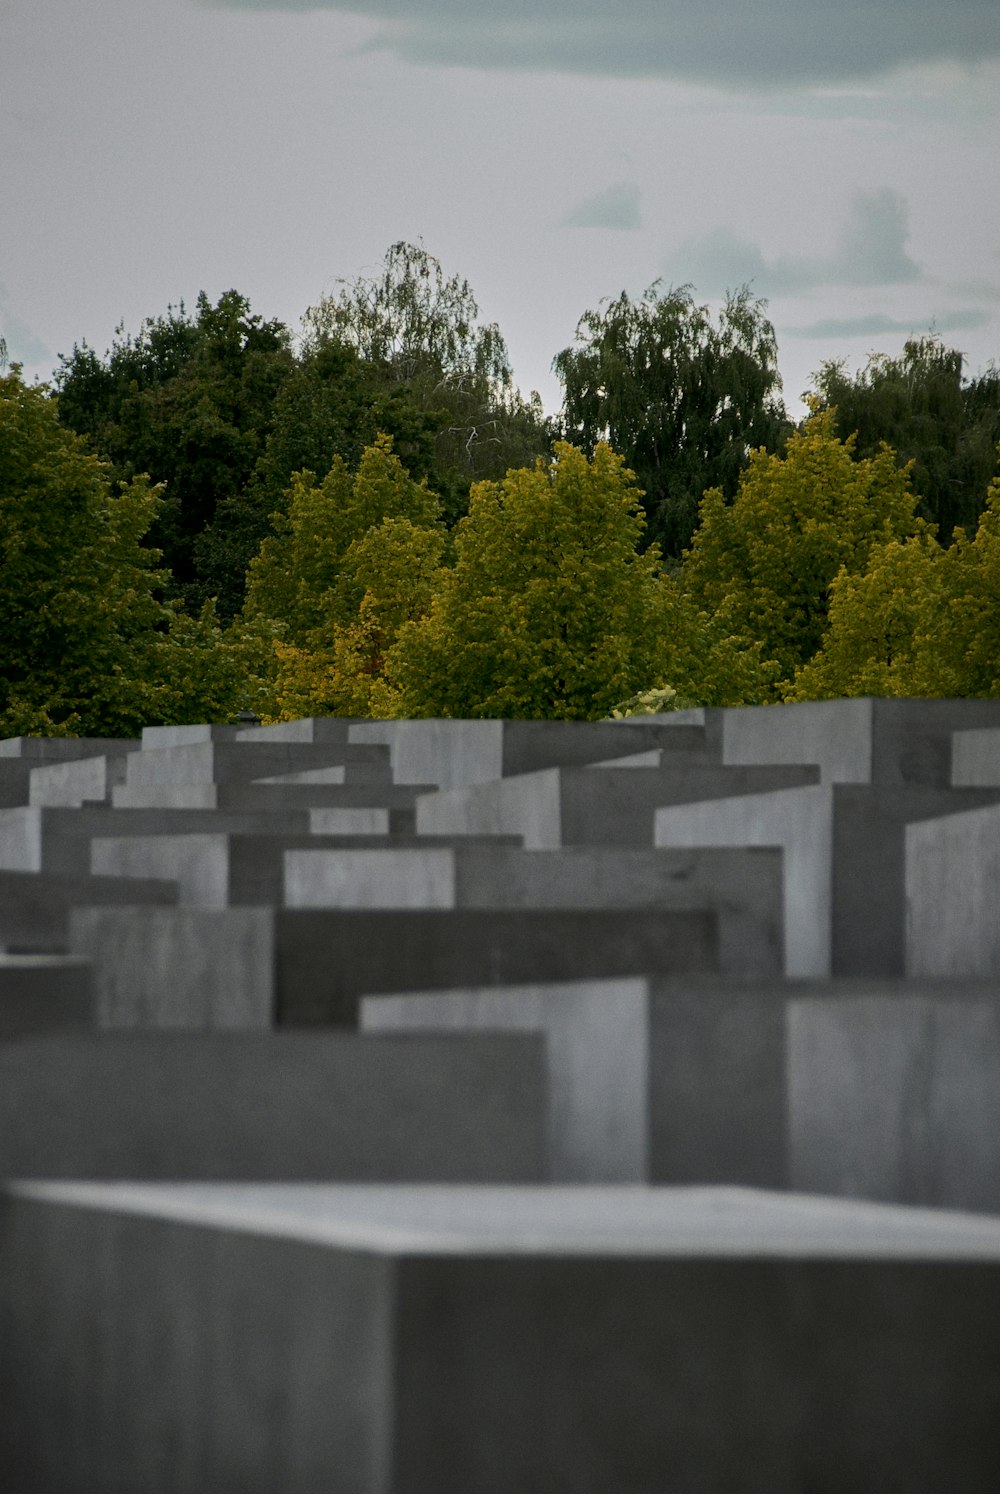 a large group of cement blocks with trees in the background